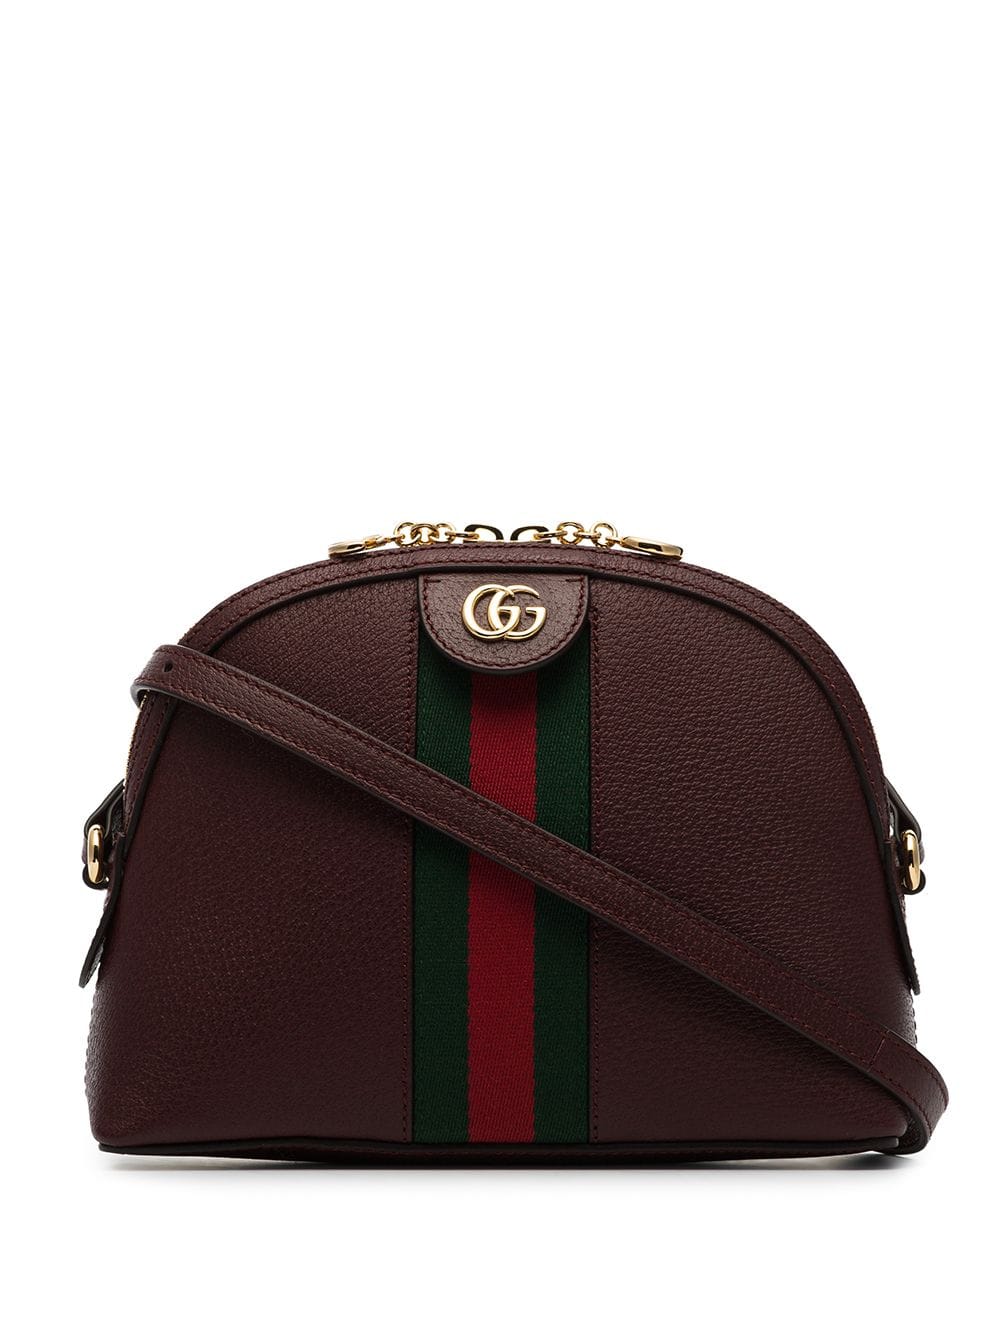 Gucci - Small Ophidia Shoulder Bag | FASHION STYLE FAN